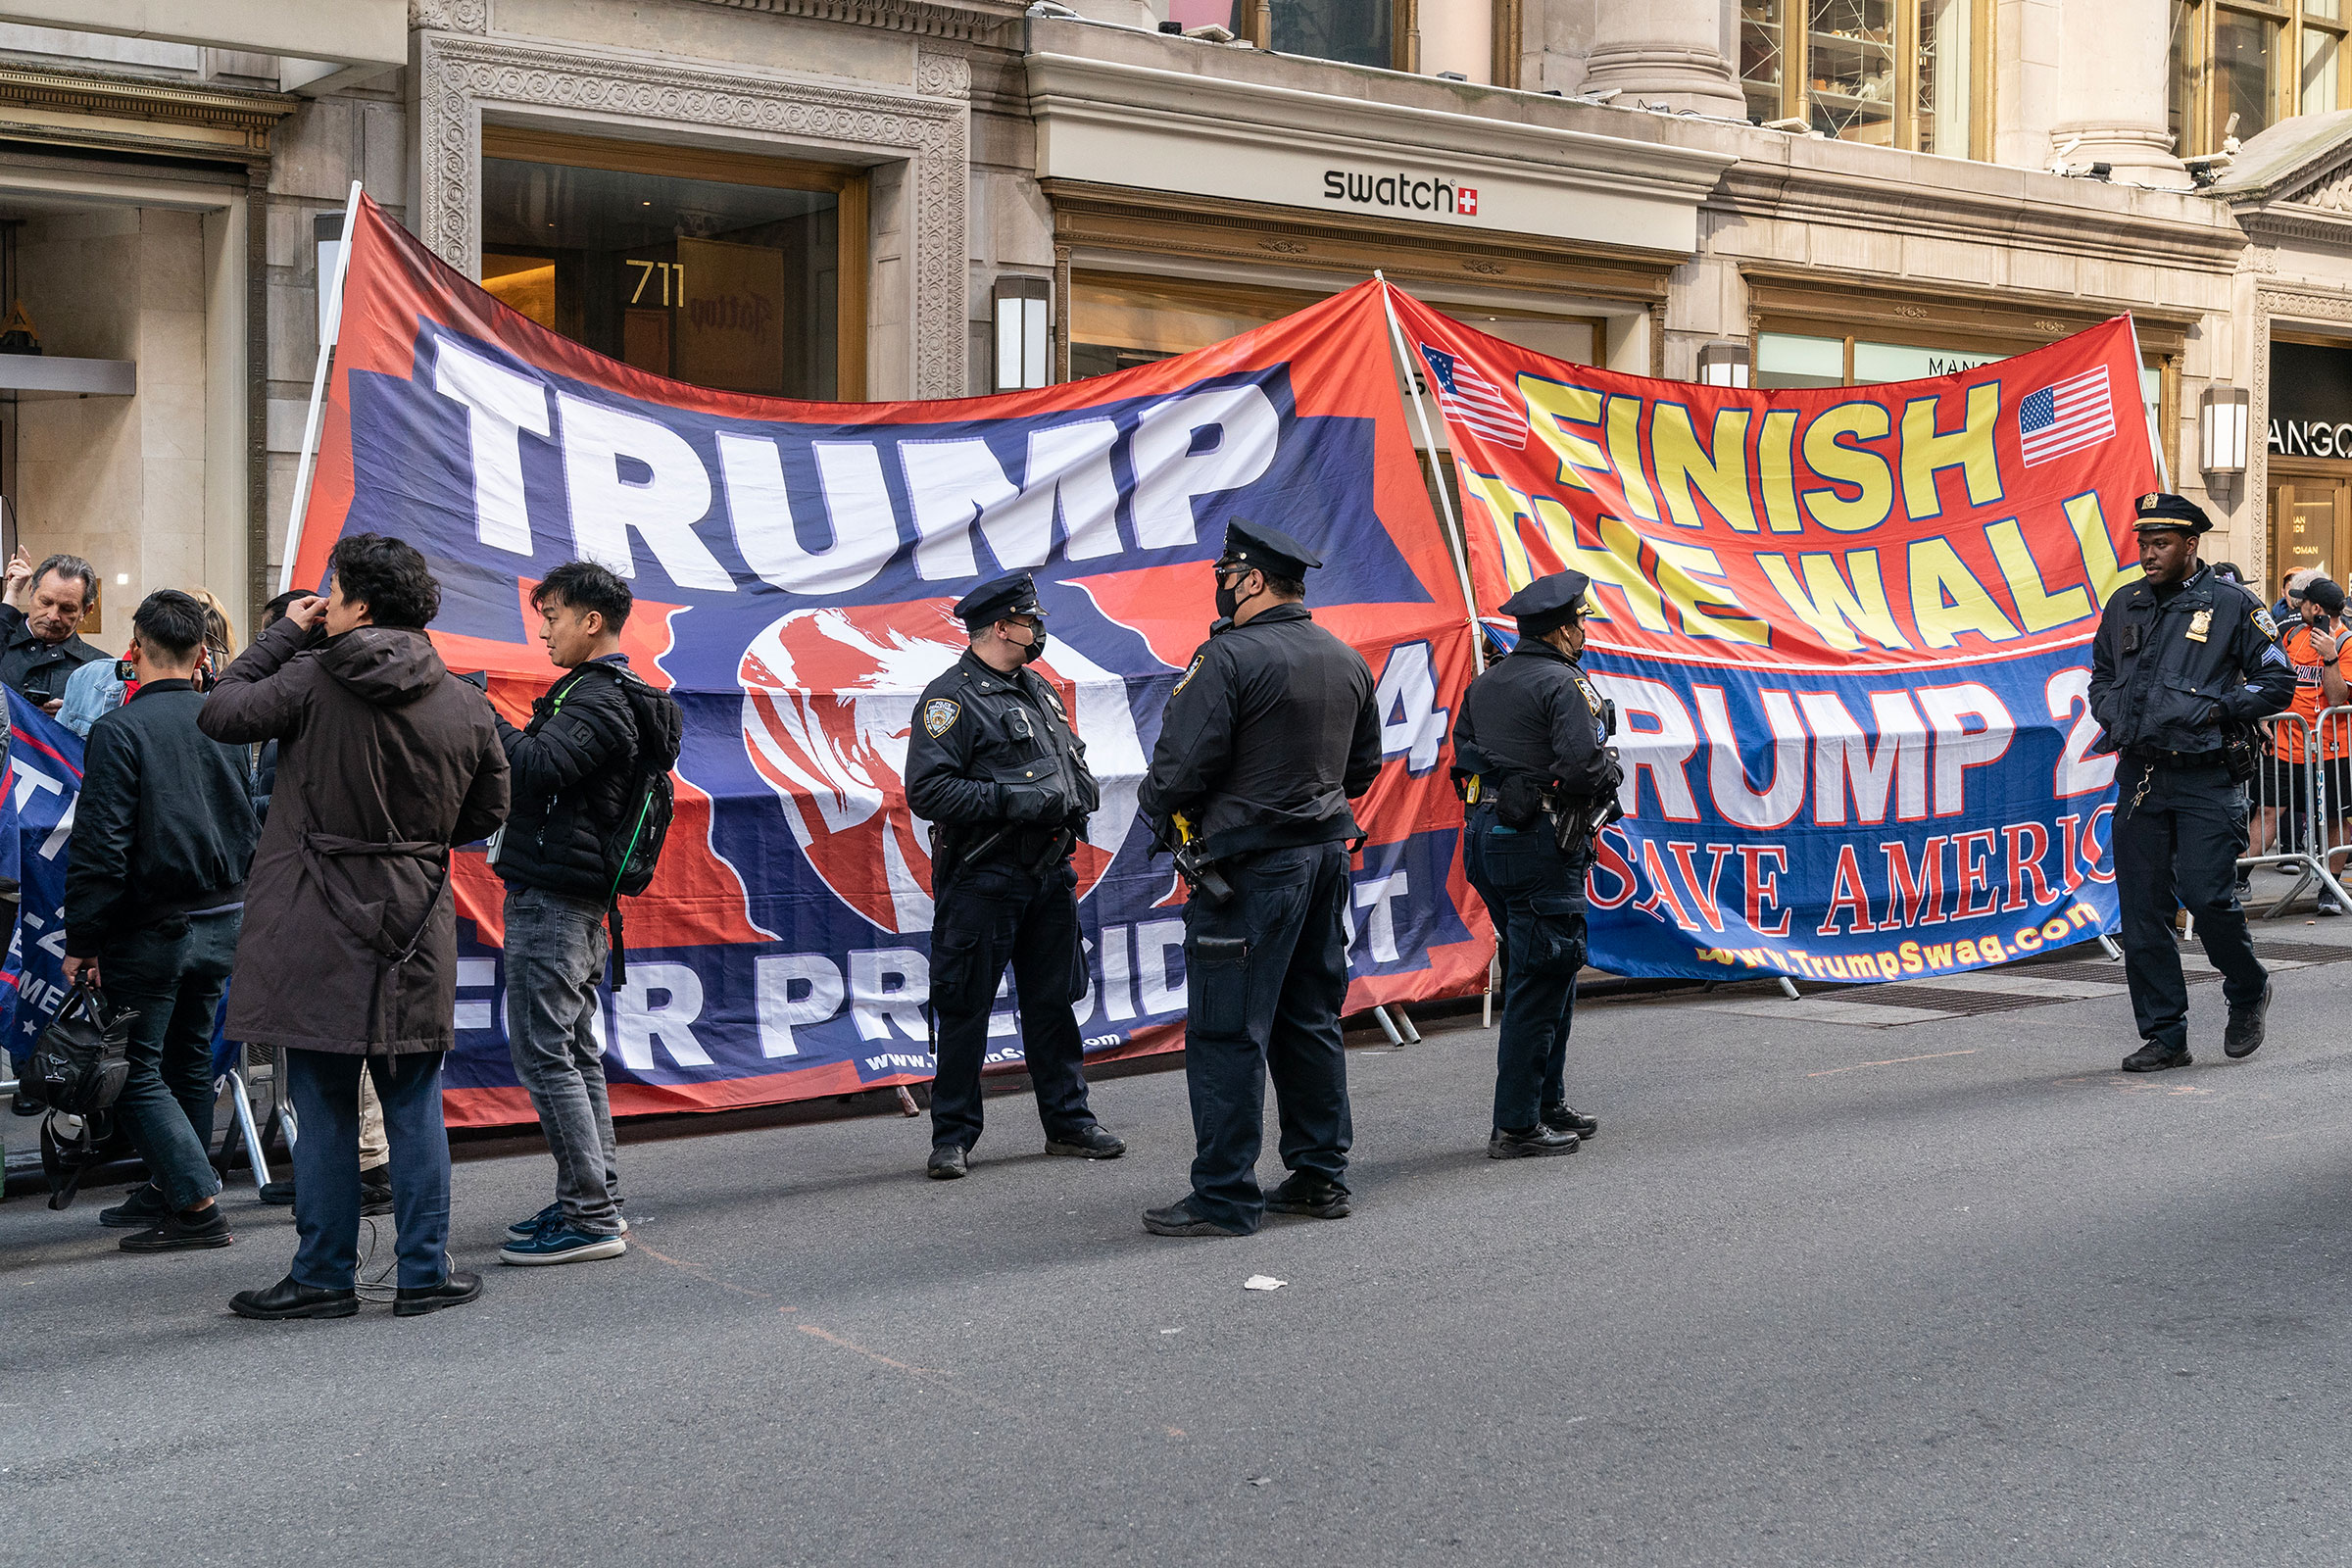 Supporters of Former President Donald Trump rally at Trump Tower in New York. (Lev Radin—Pacific Press/LightRocket/Getty Images)